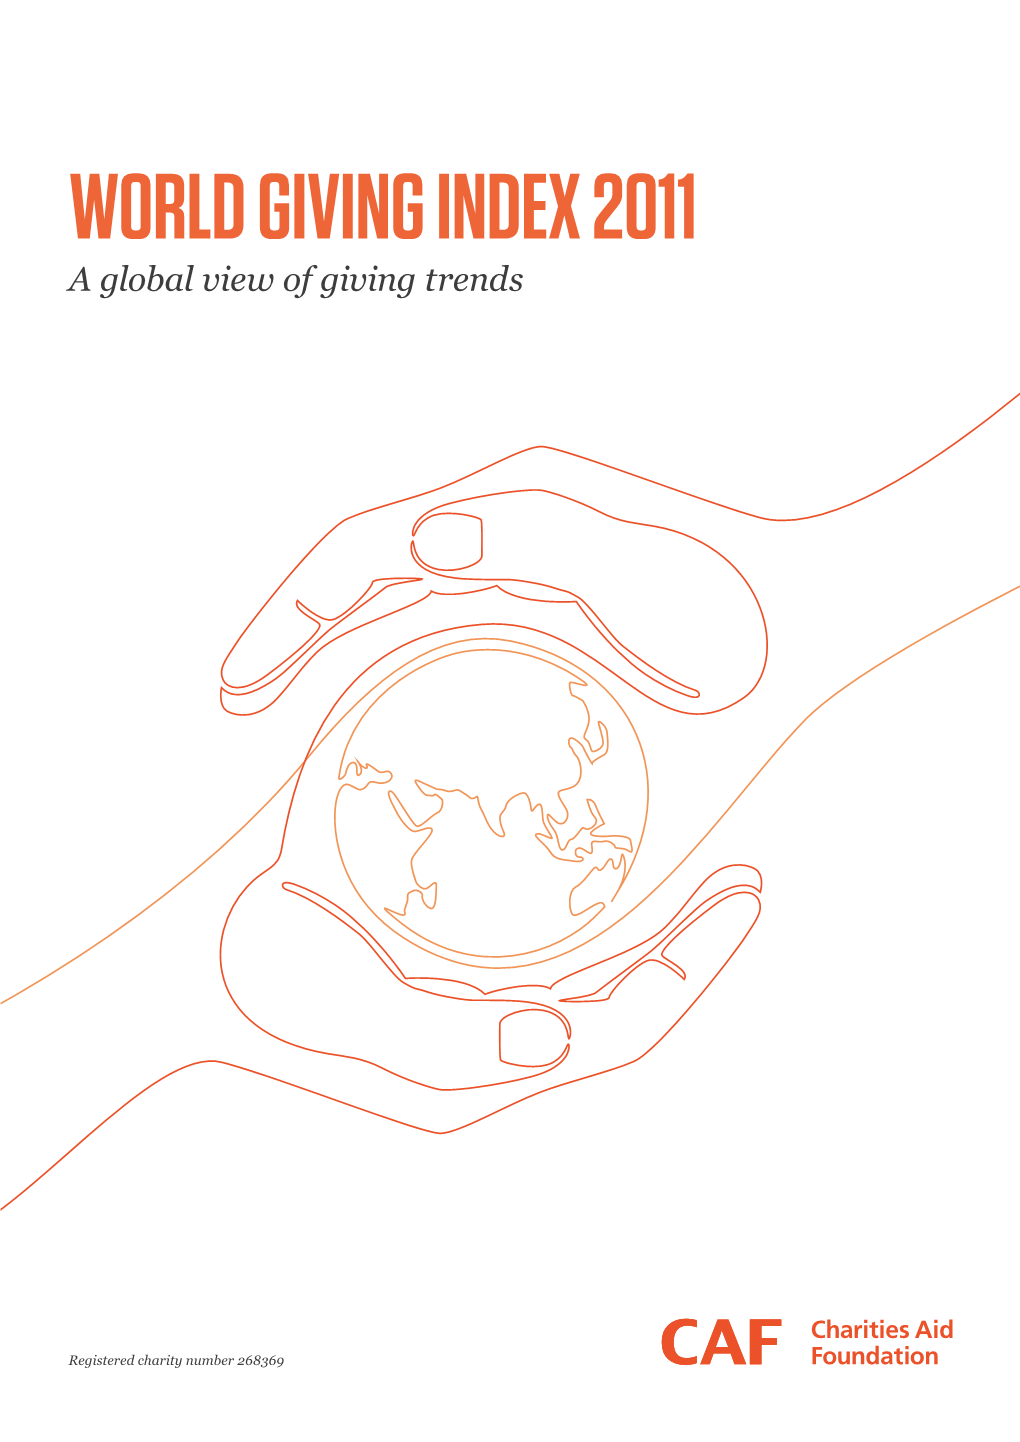 WORLD GIVING INDEX 2011 a Global View of Giving Trends